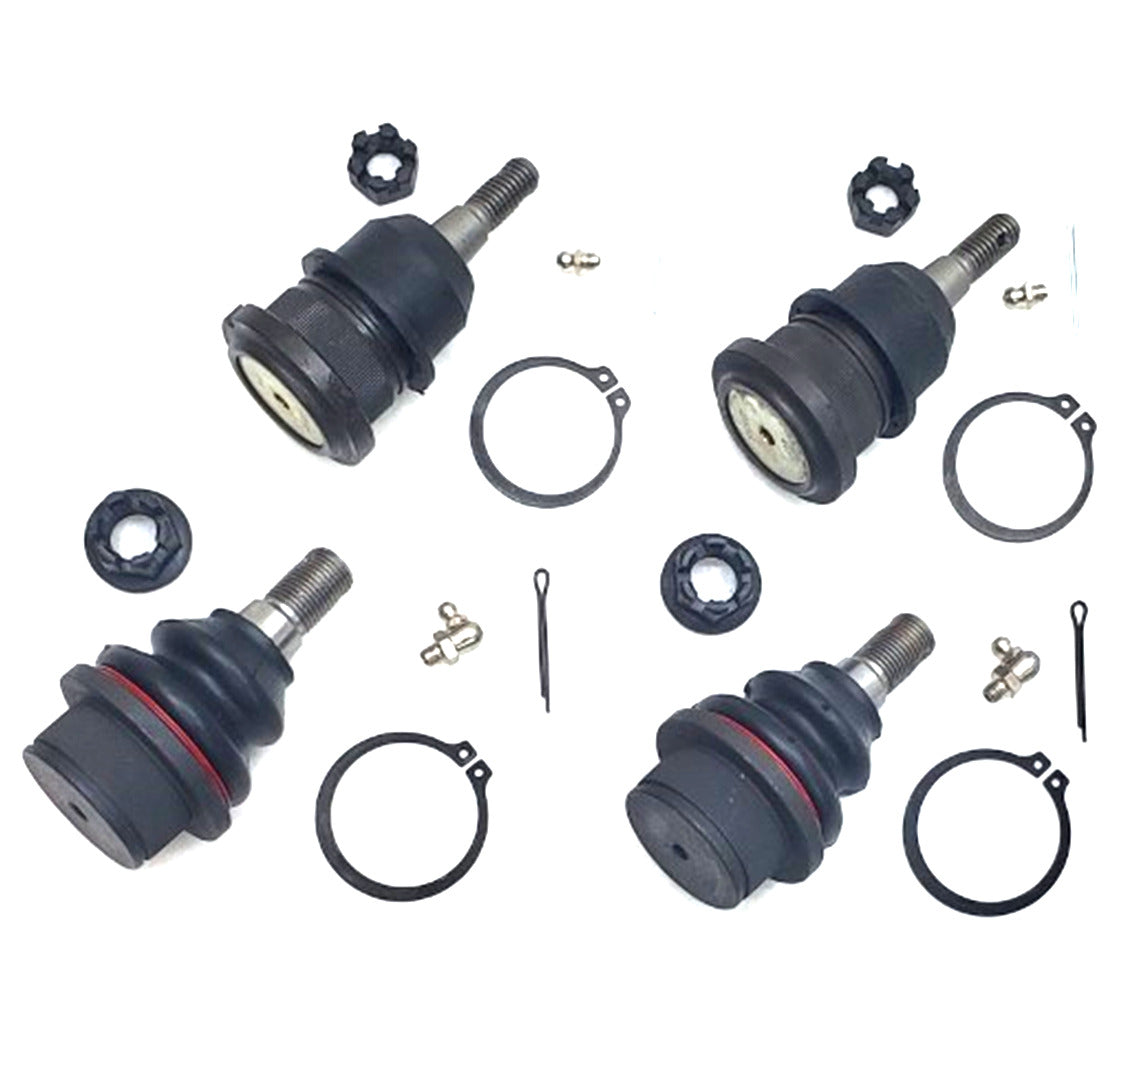 Lifetime Ball Joint Upper & Lower Kit for 1999-2007 Chevrolet, GMC, Cadillac 2WD, 4x4